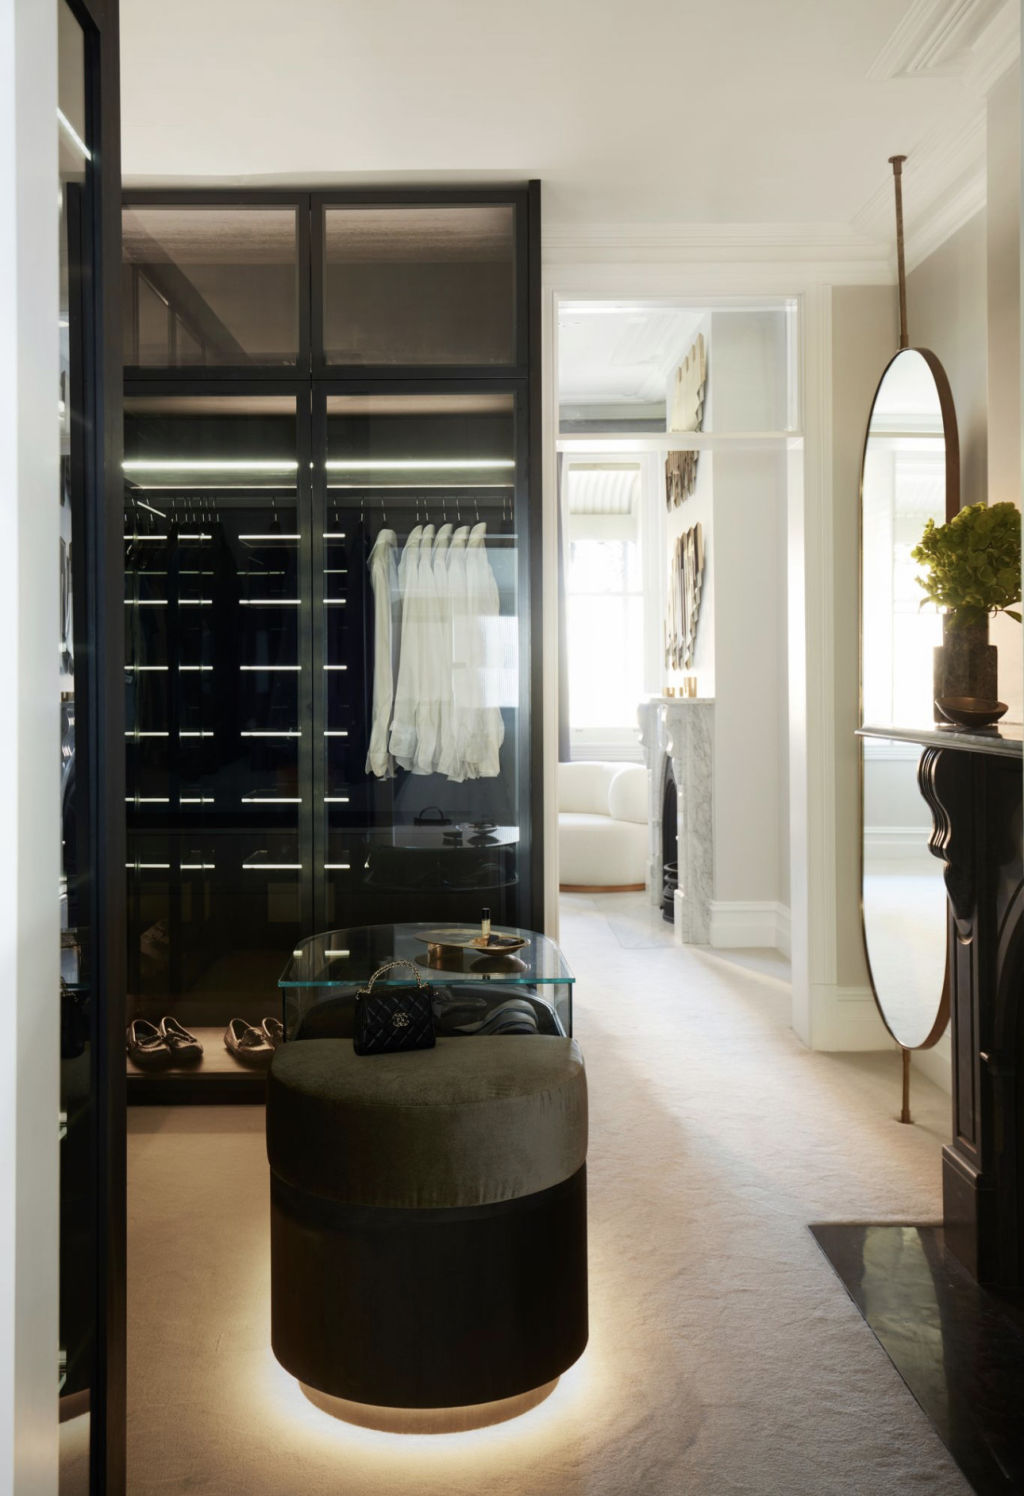 Designer Nina Maya used steel and timber to give the wardrobe in this Potts Point home a dark and moody feel. Photo: Prue Ruscoe